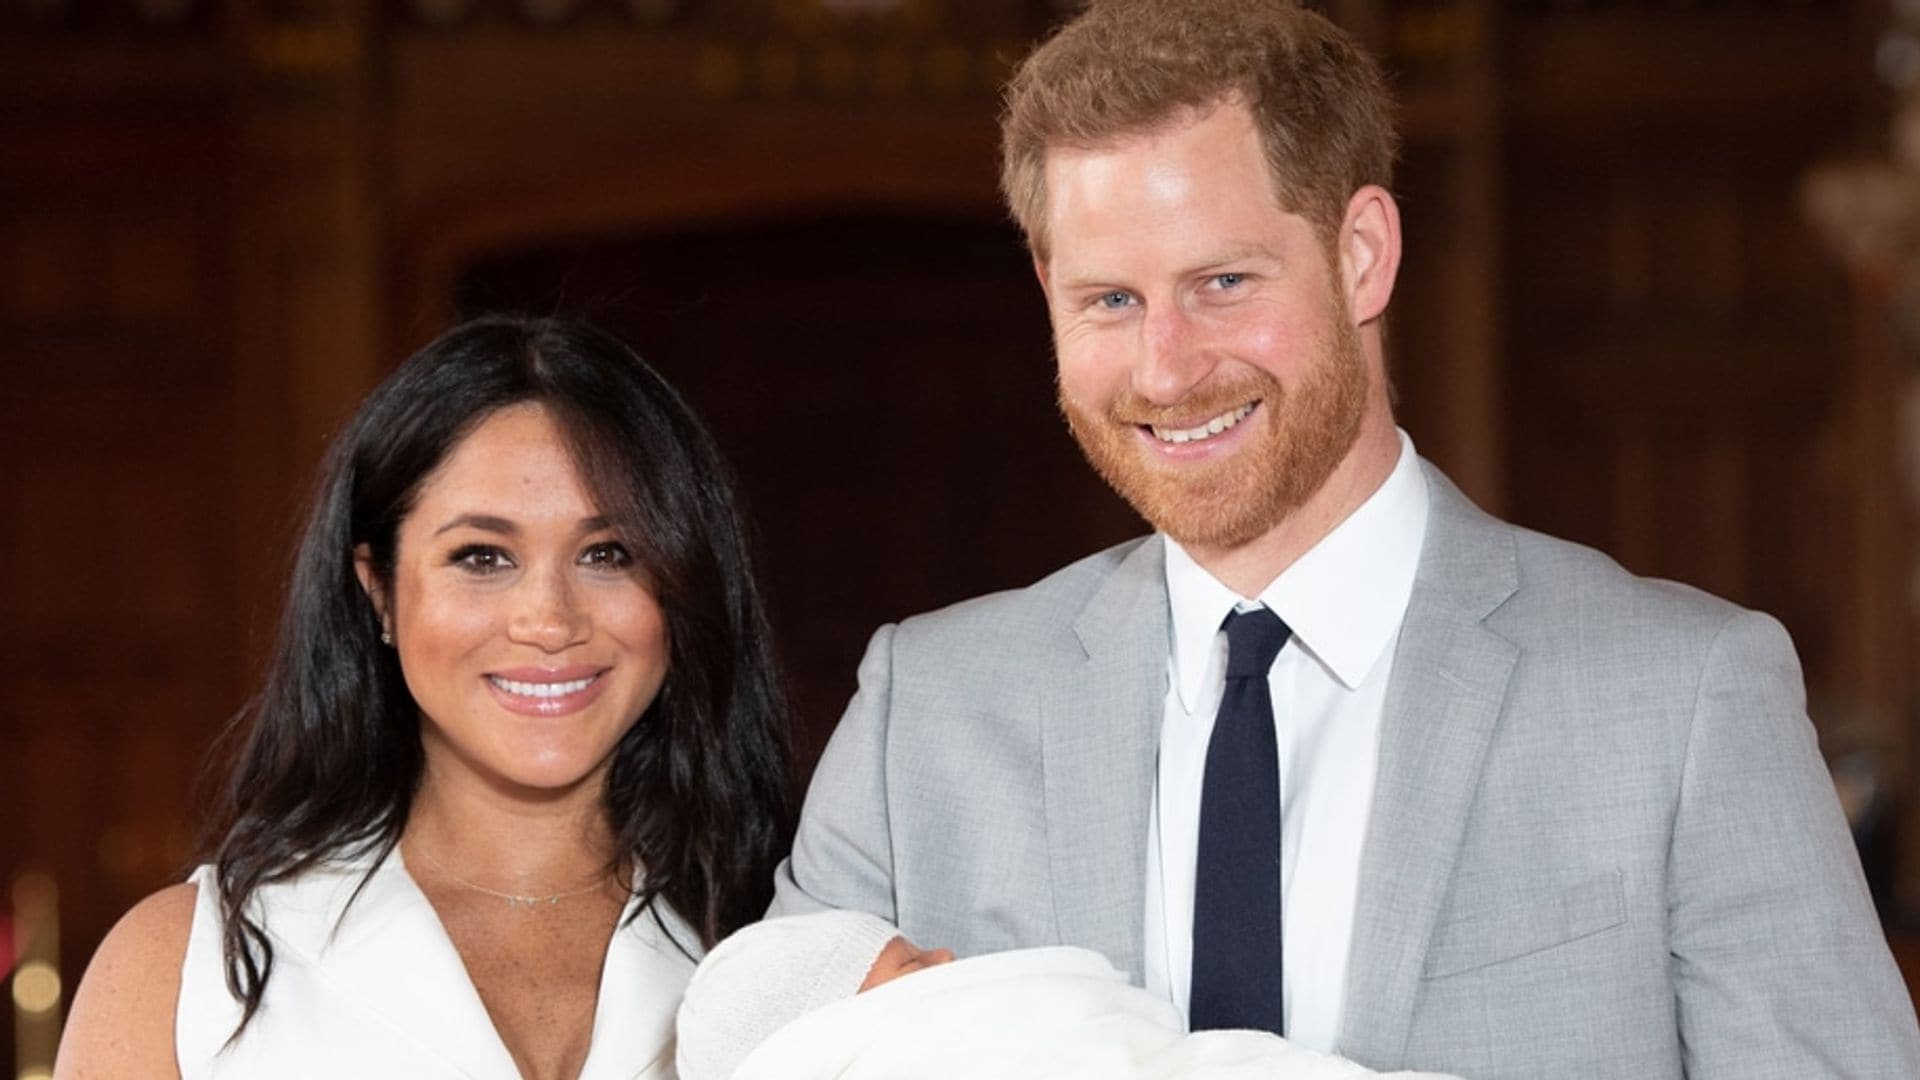 Everything you need to know about Meghan and Harry's first tour with Archie